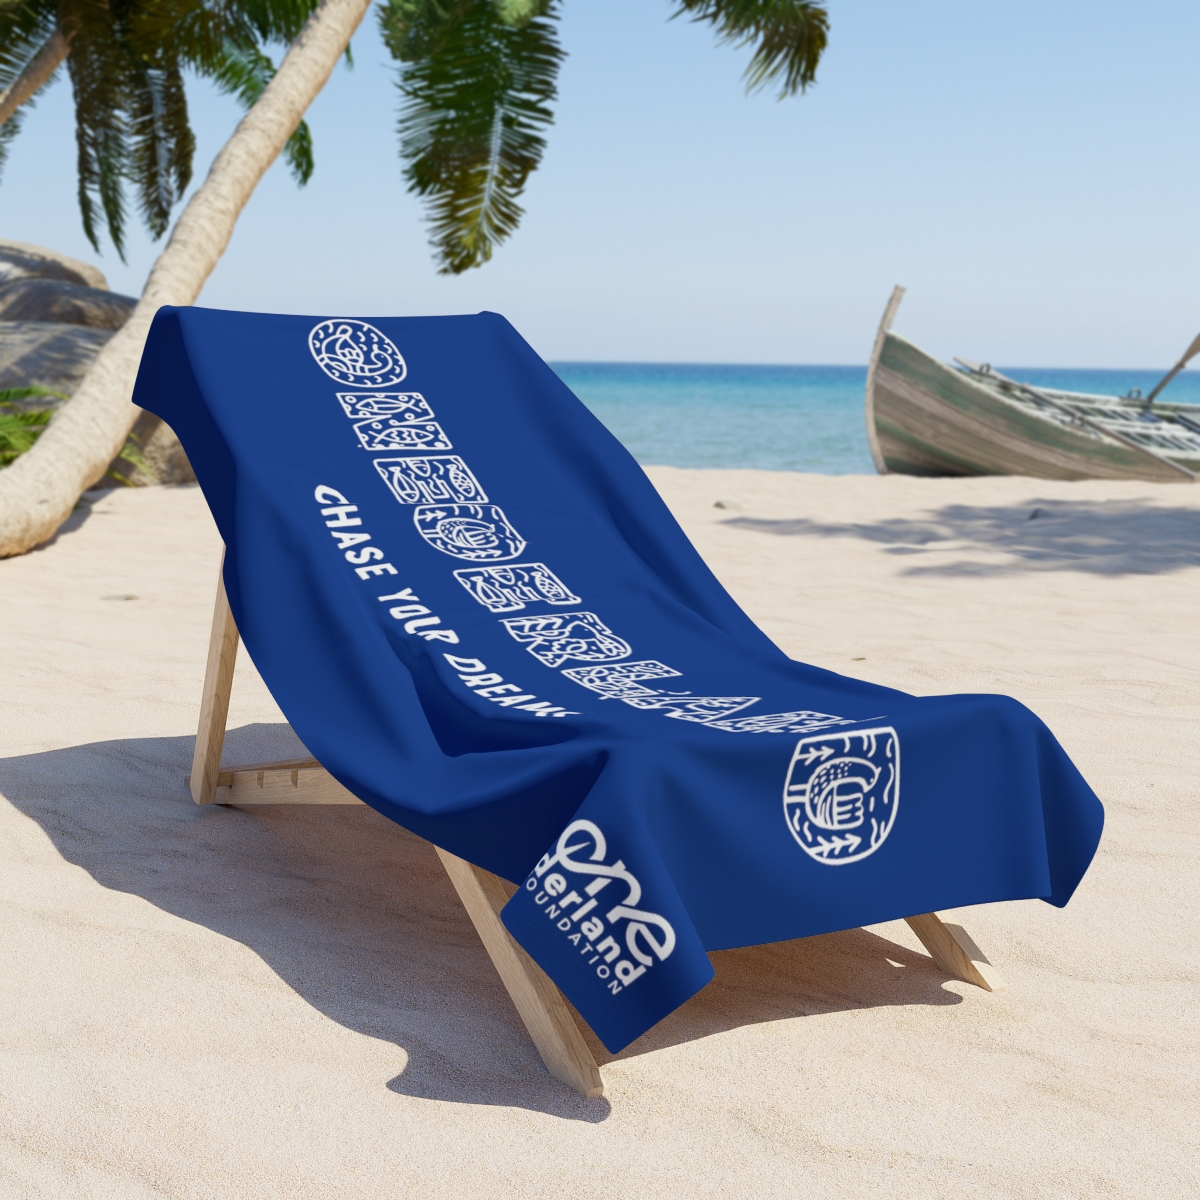 Beach Towel - Chase Your Dreams product thumbnail image